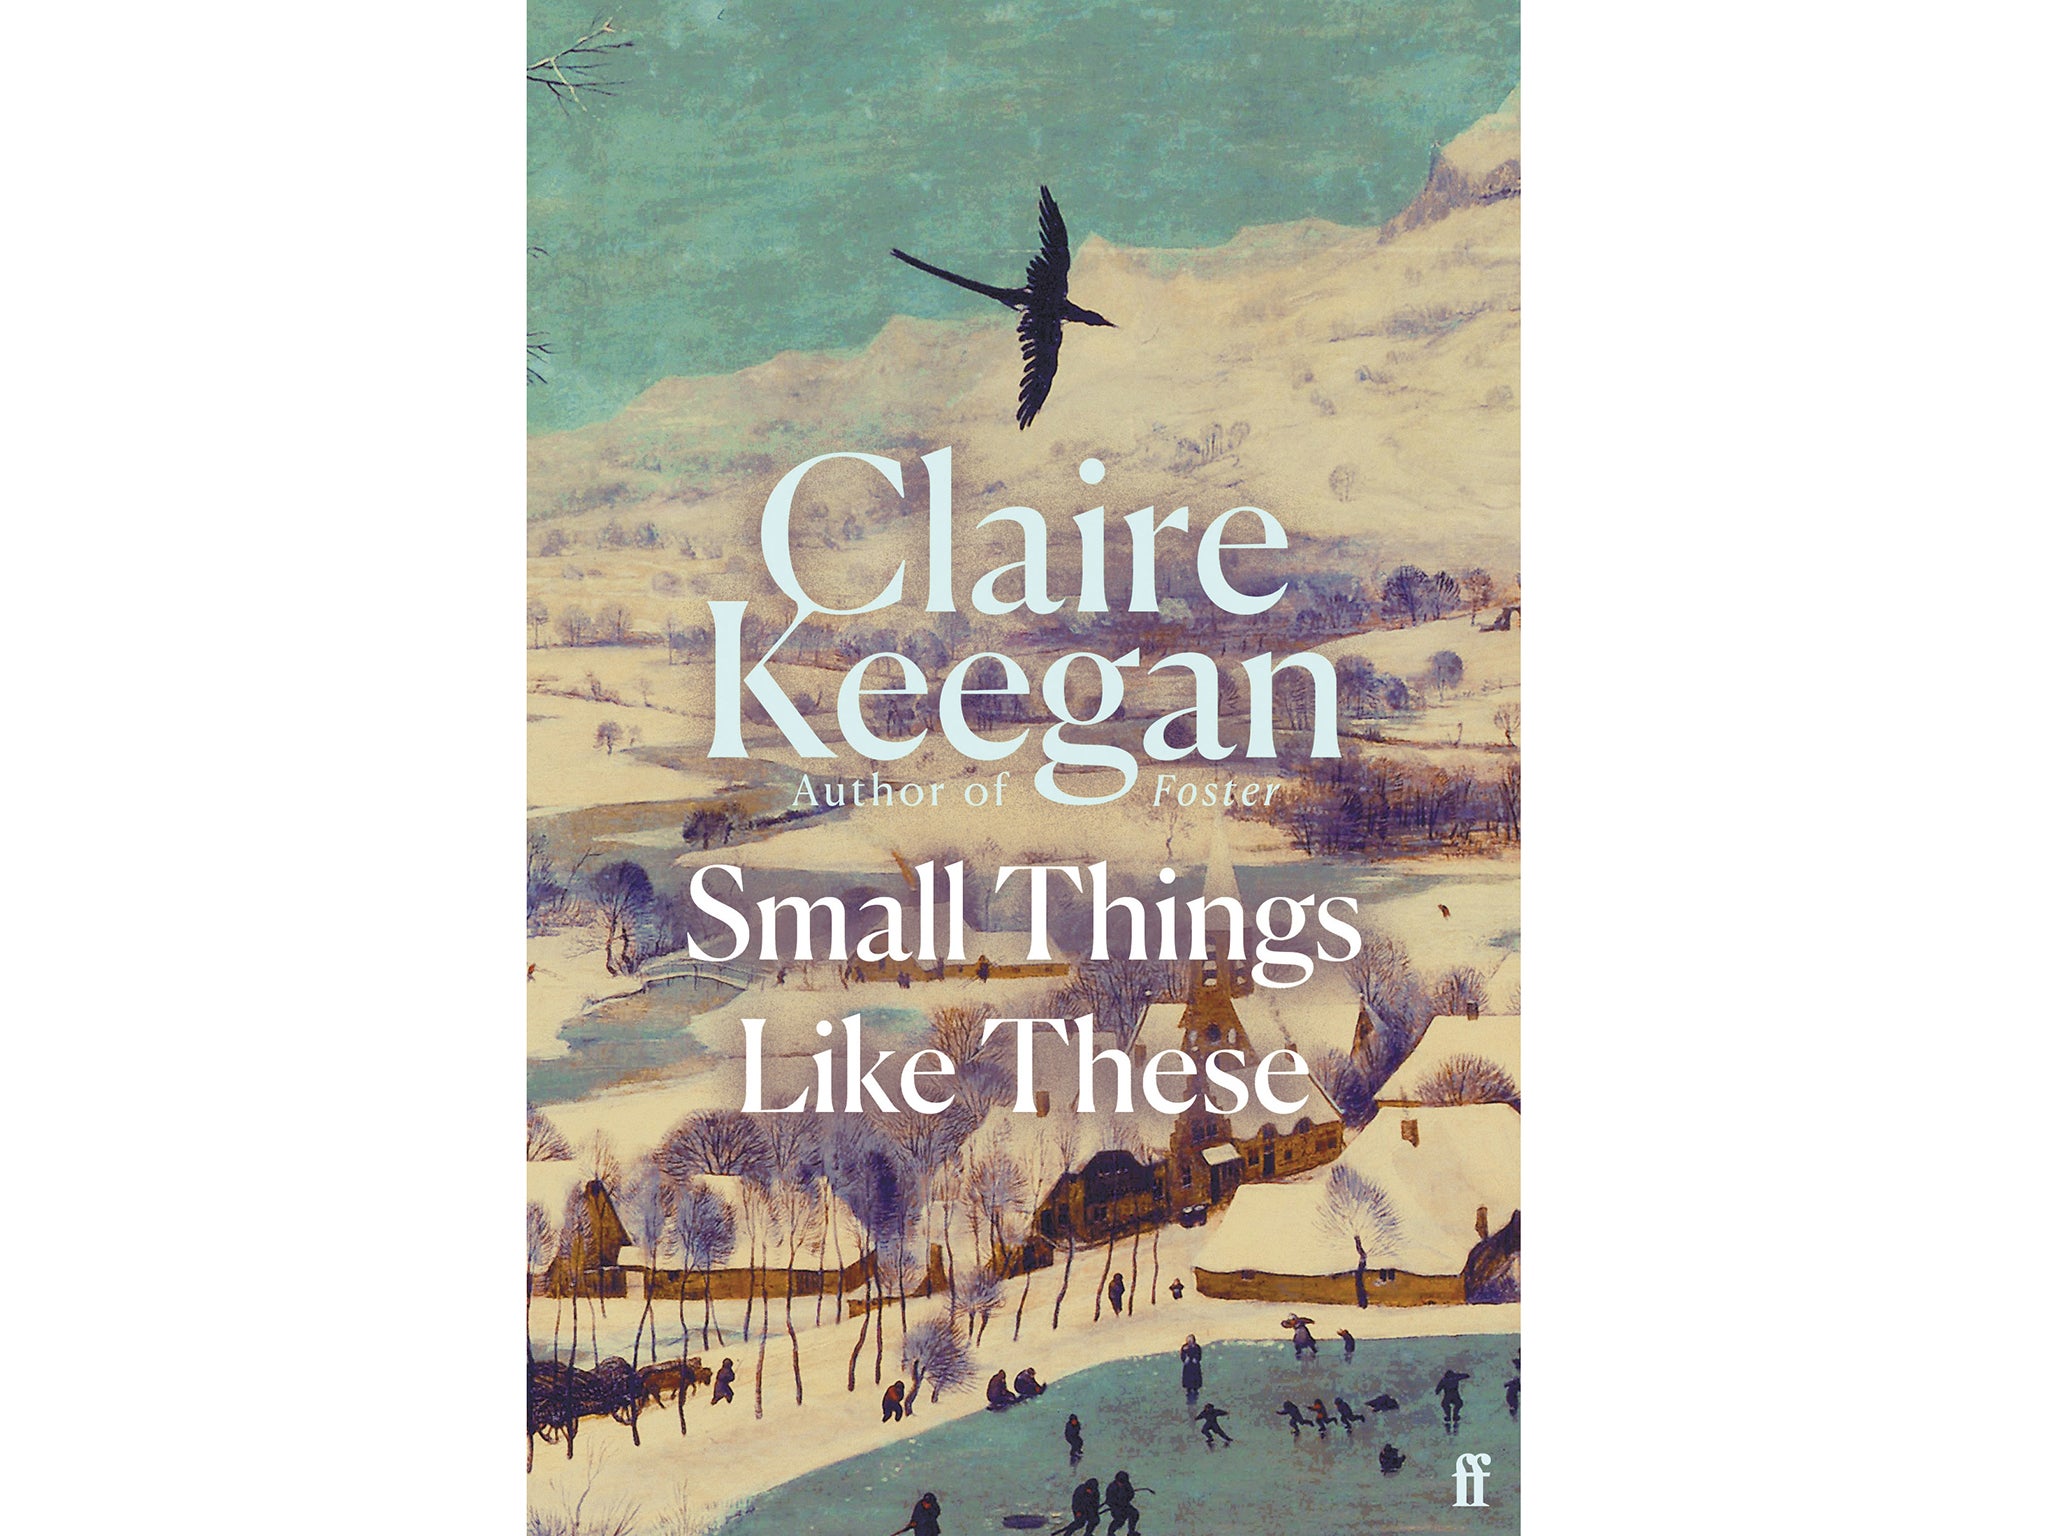 indybest-booker-prize-shortlist-2022- Small-things-Like-These-Claire-Keegan.jpg